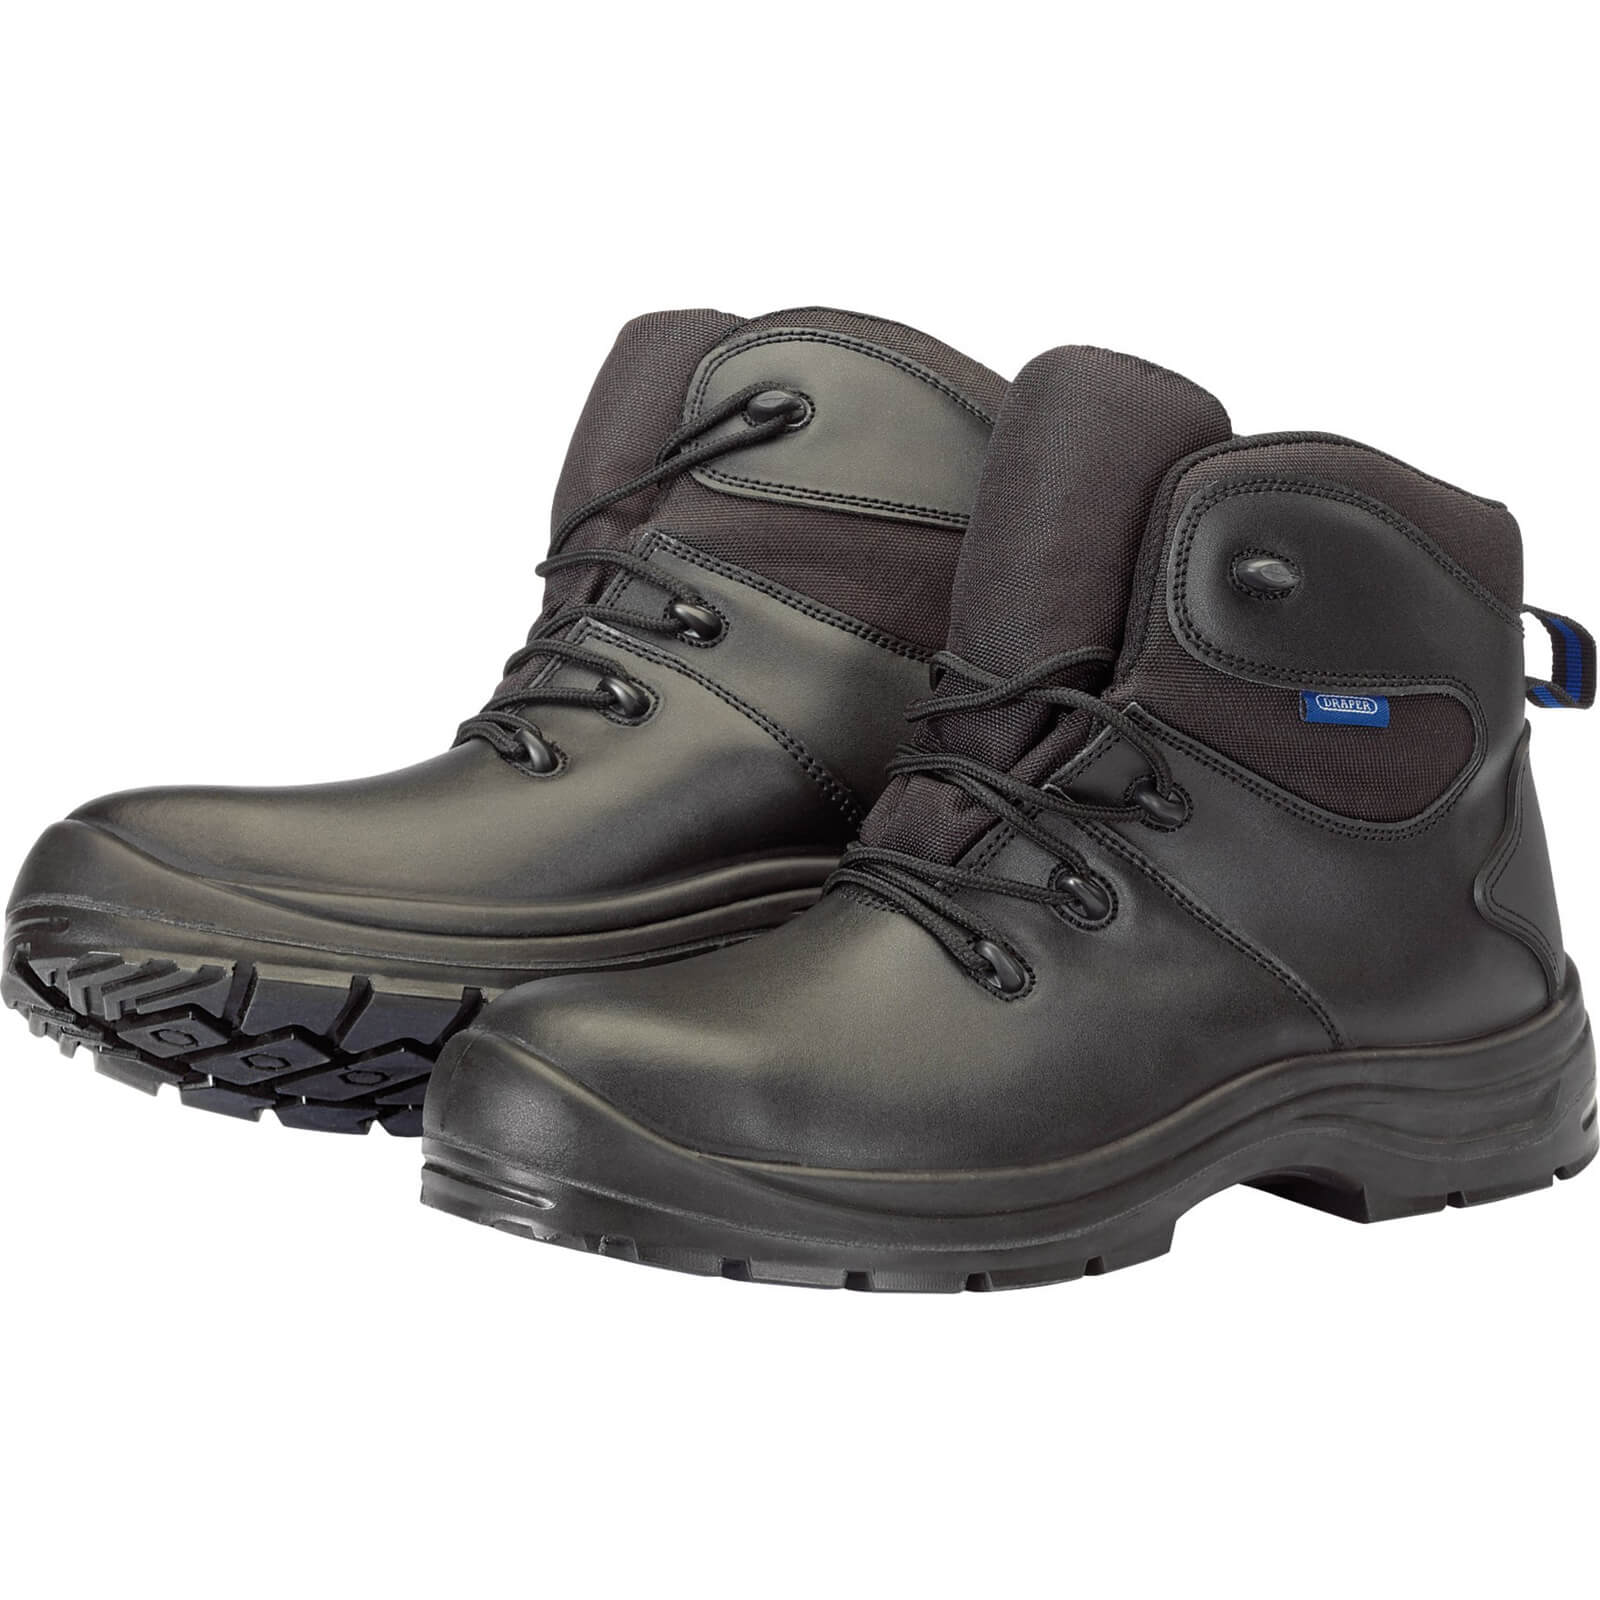 Image of Draper Mens Waterproof Safety Boots Black Size 12